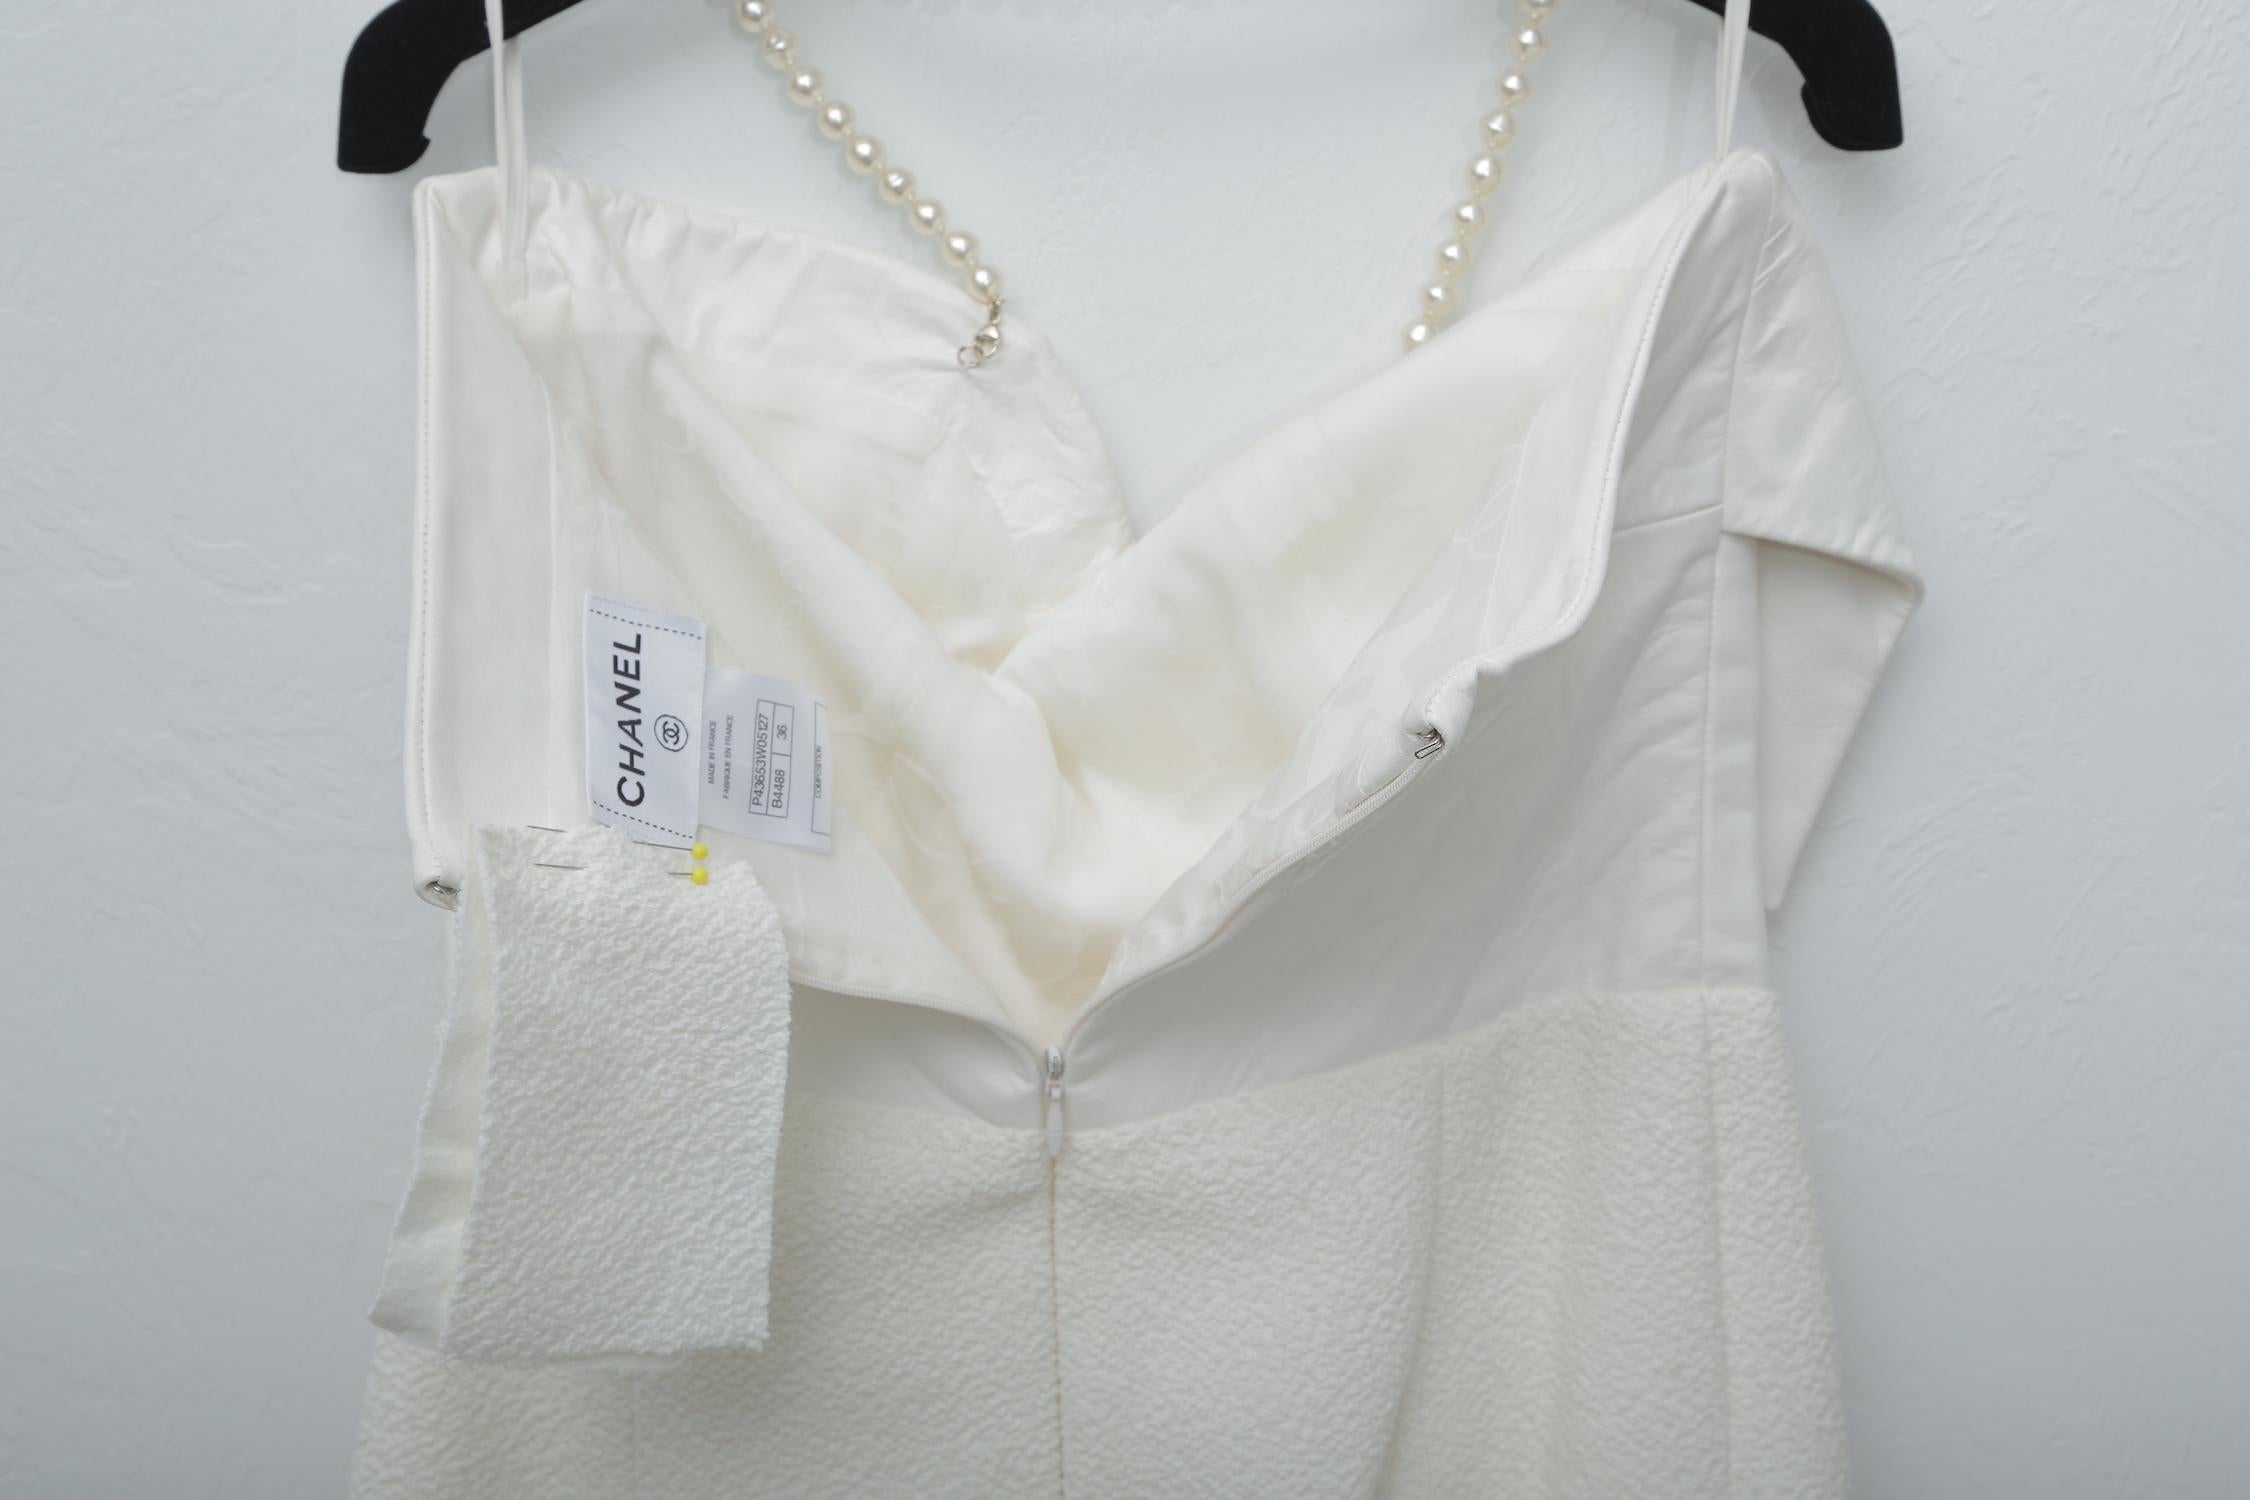 Superb Chanel White Tweet Dress with Pearls with Matching Crop Jacket  2